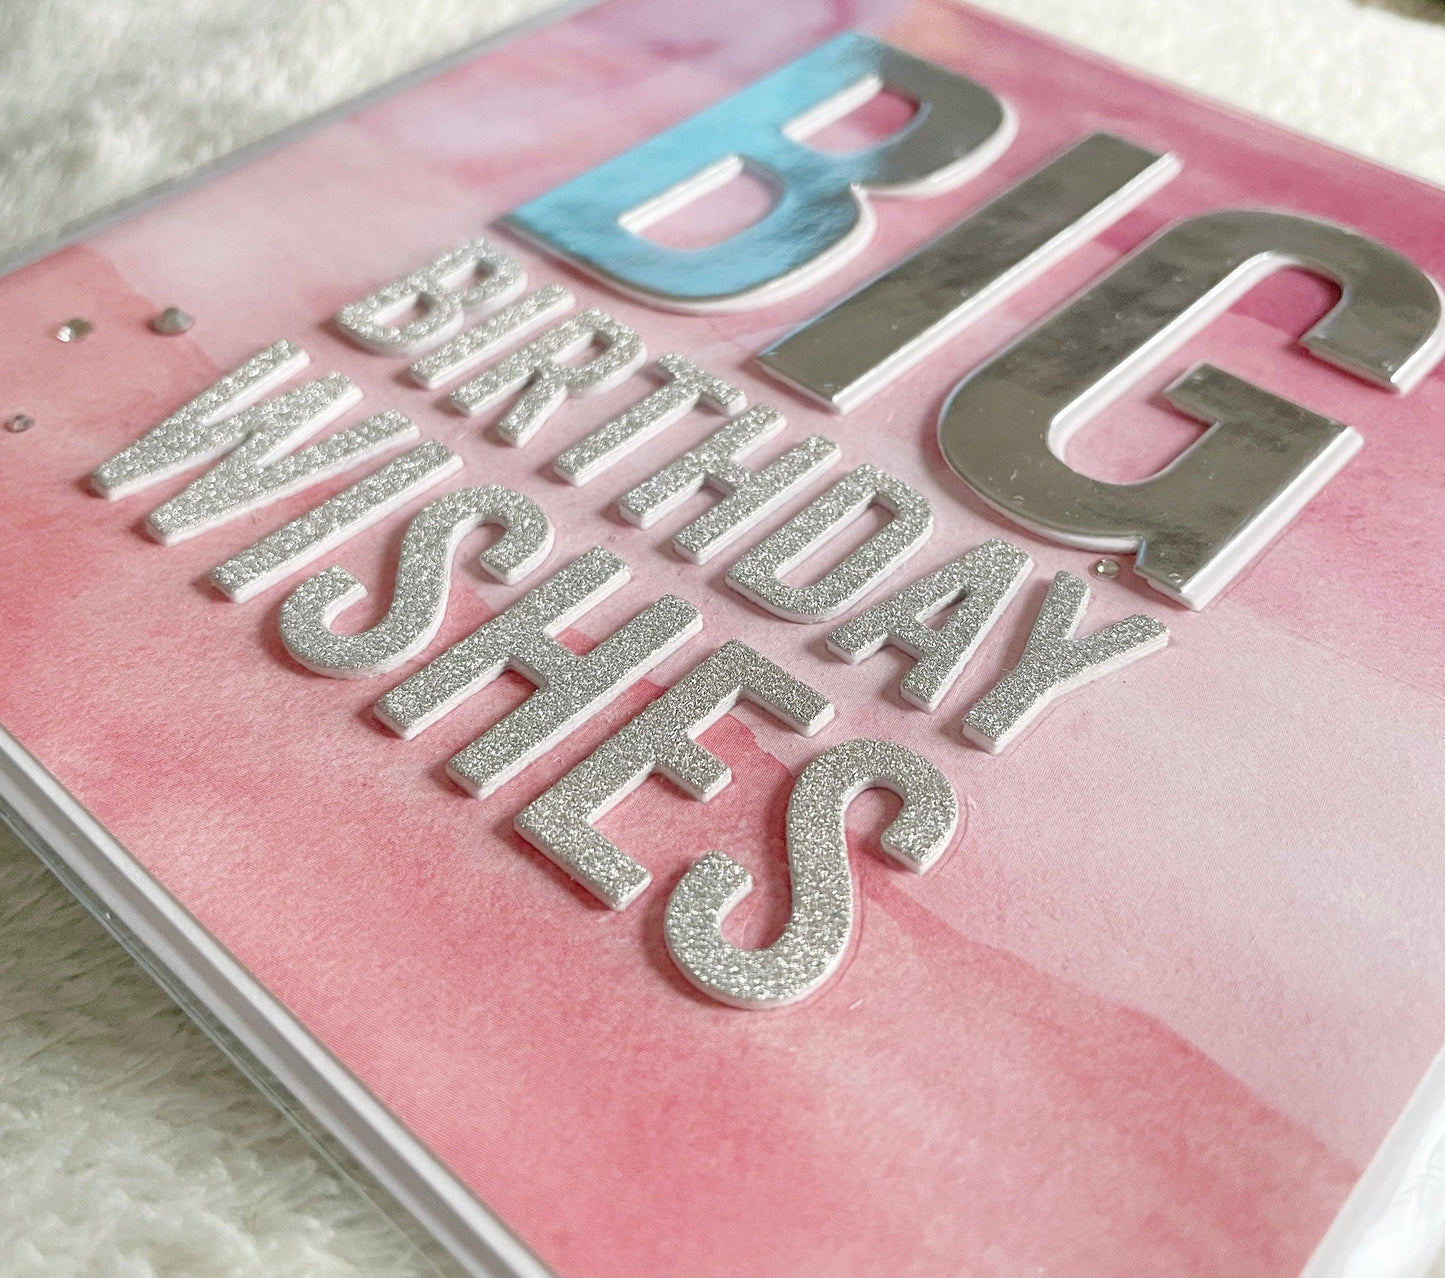 Handmade 5.75 inch Square Ombre Pink ‘BIG Birthday Wishes’ Card - Oliver Rose Designs